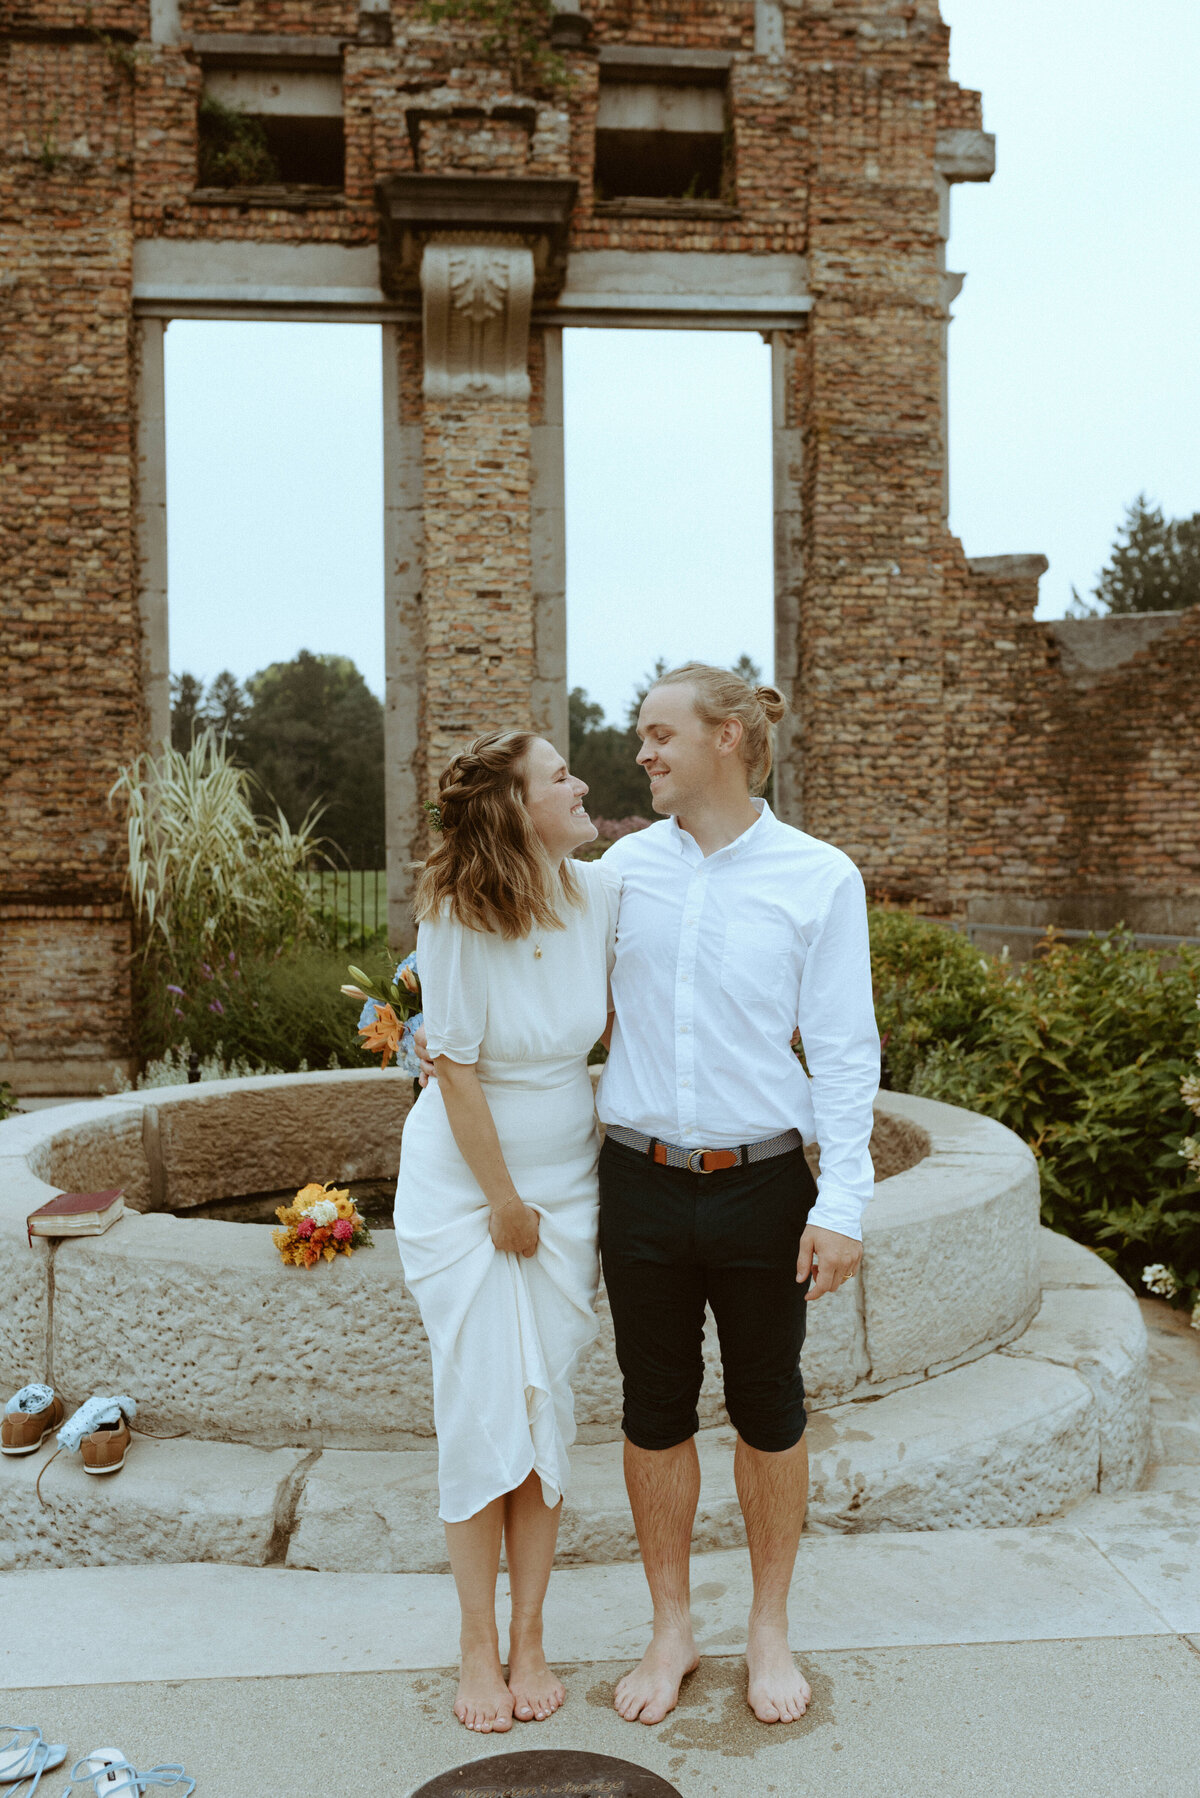 JustJessPhotography_Indianapolis Photographer_Brittany&Hank Holliday Park elopement547